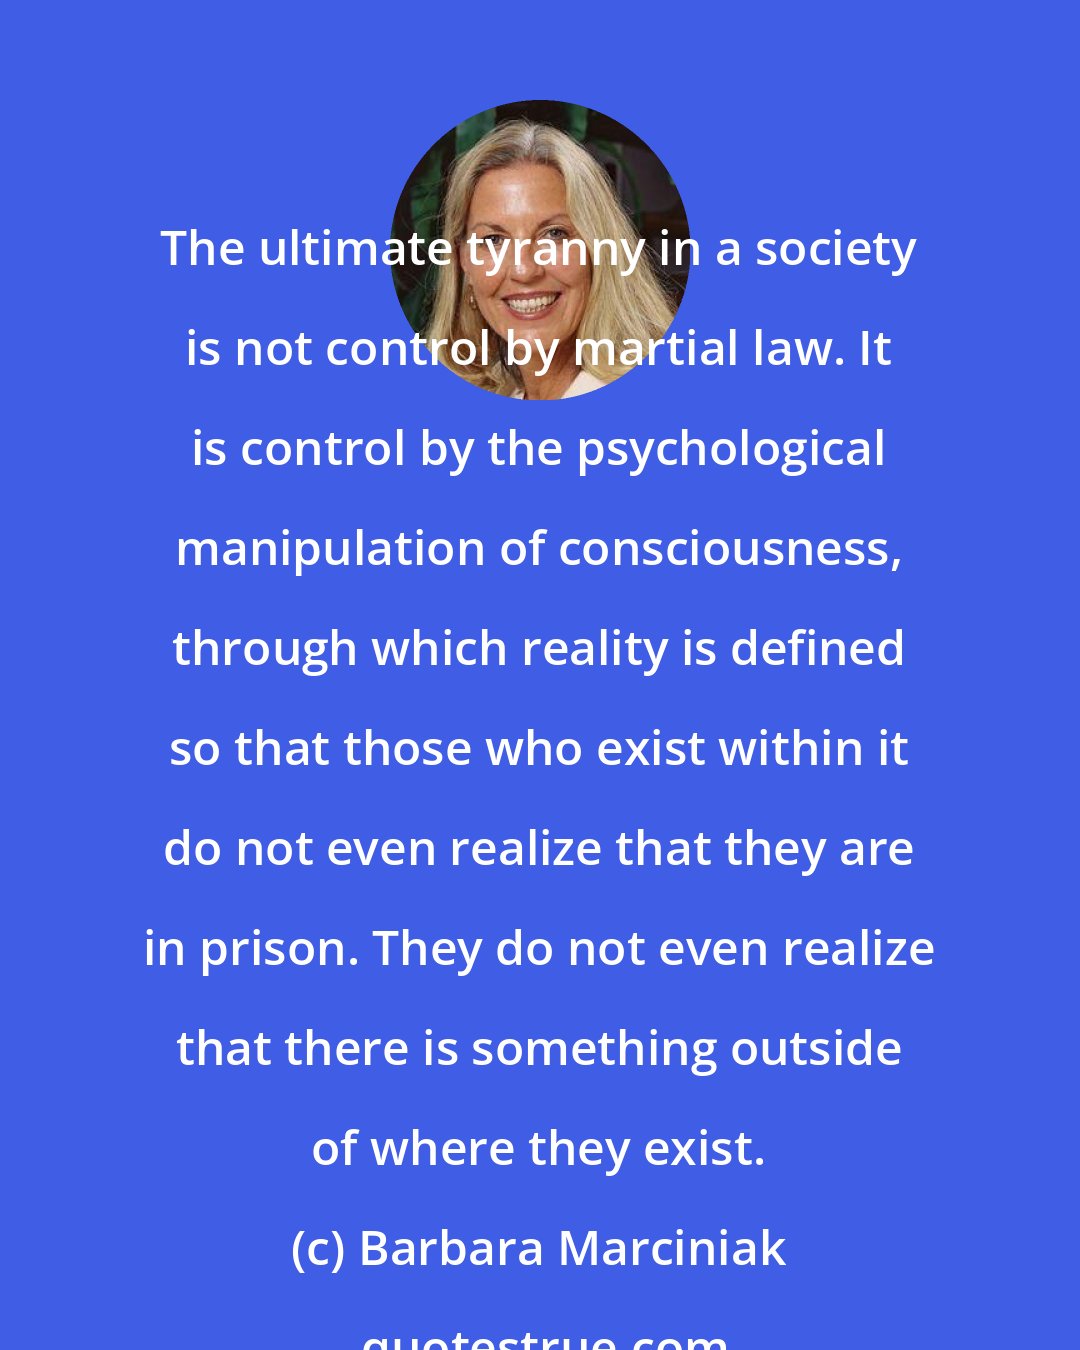 Barbara Marciniak: The ultimate tyranny in a society is not control by martial law. It is control by the psychological manipulation of consciousness, through which reality is defined so that those who exist within it do not even realize that they are in prison. They do not even realize that there is something outside of where they exist.